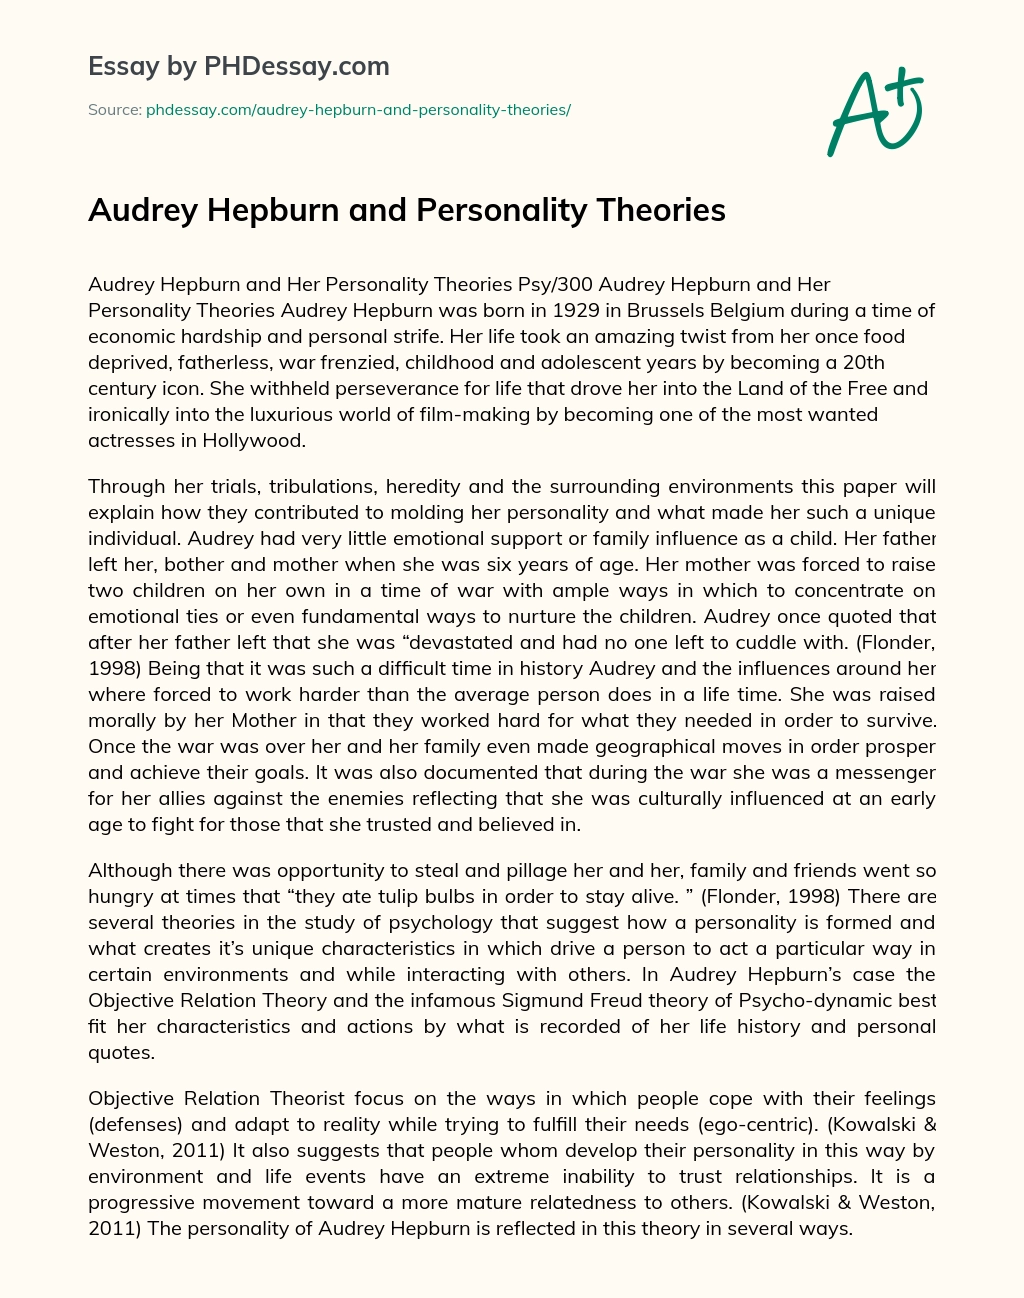 Audrey Hepburn and Personality Theories essay